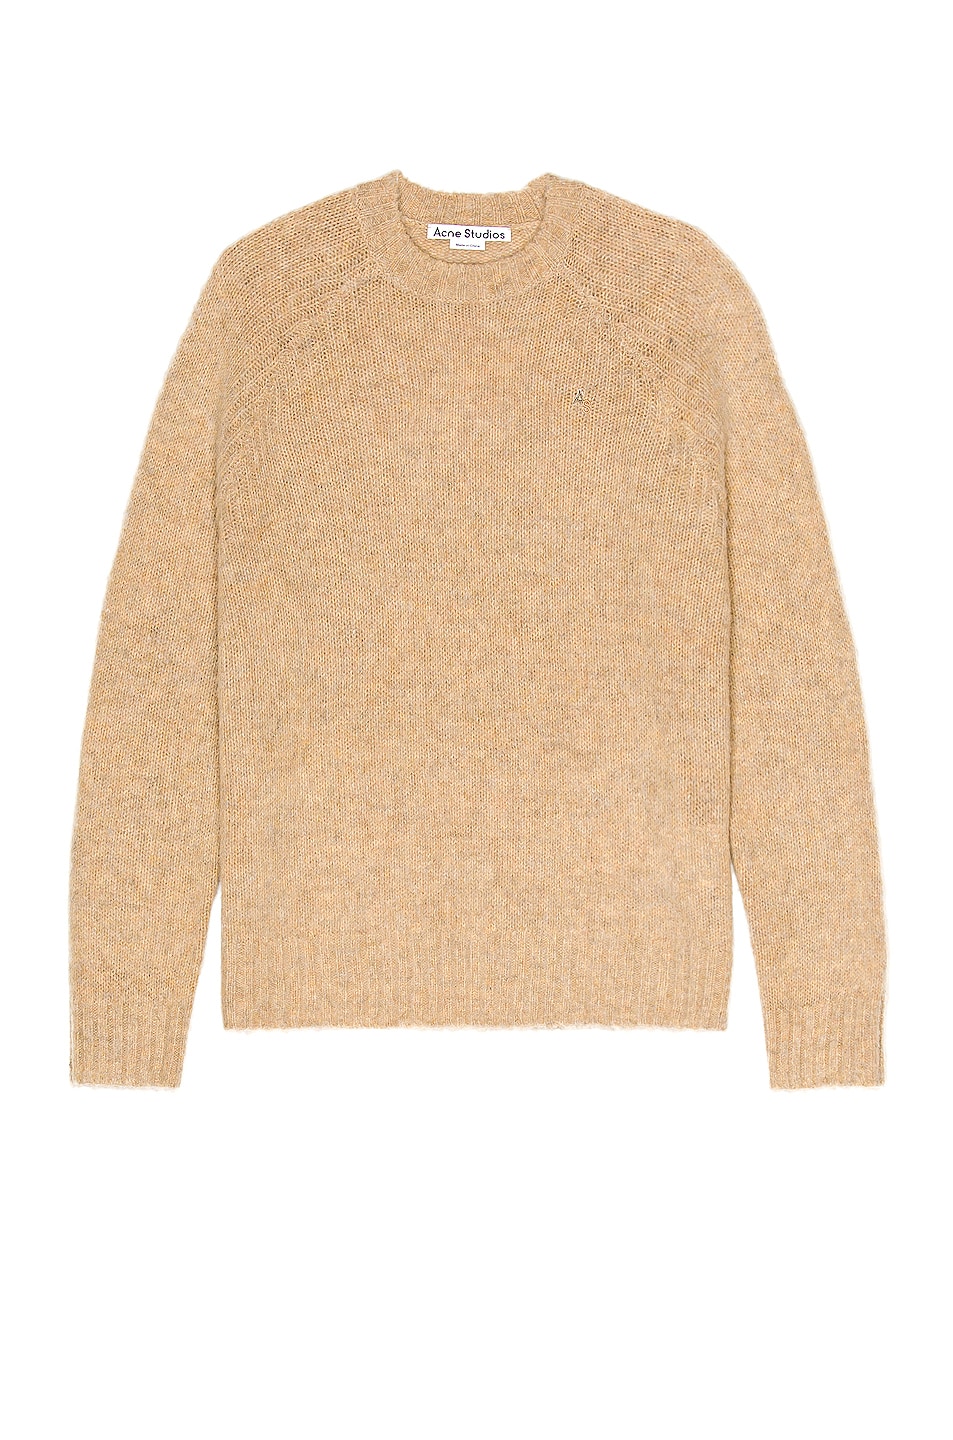 Image 1 of Acne Studios Knit Sweater in Toffee Brown